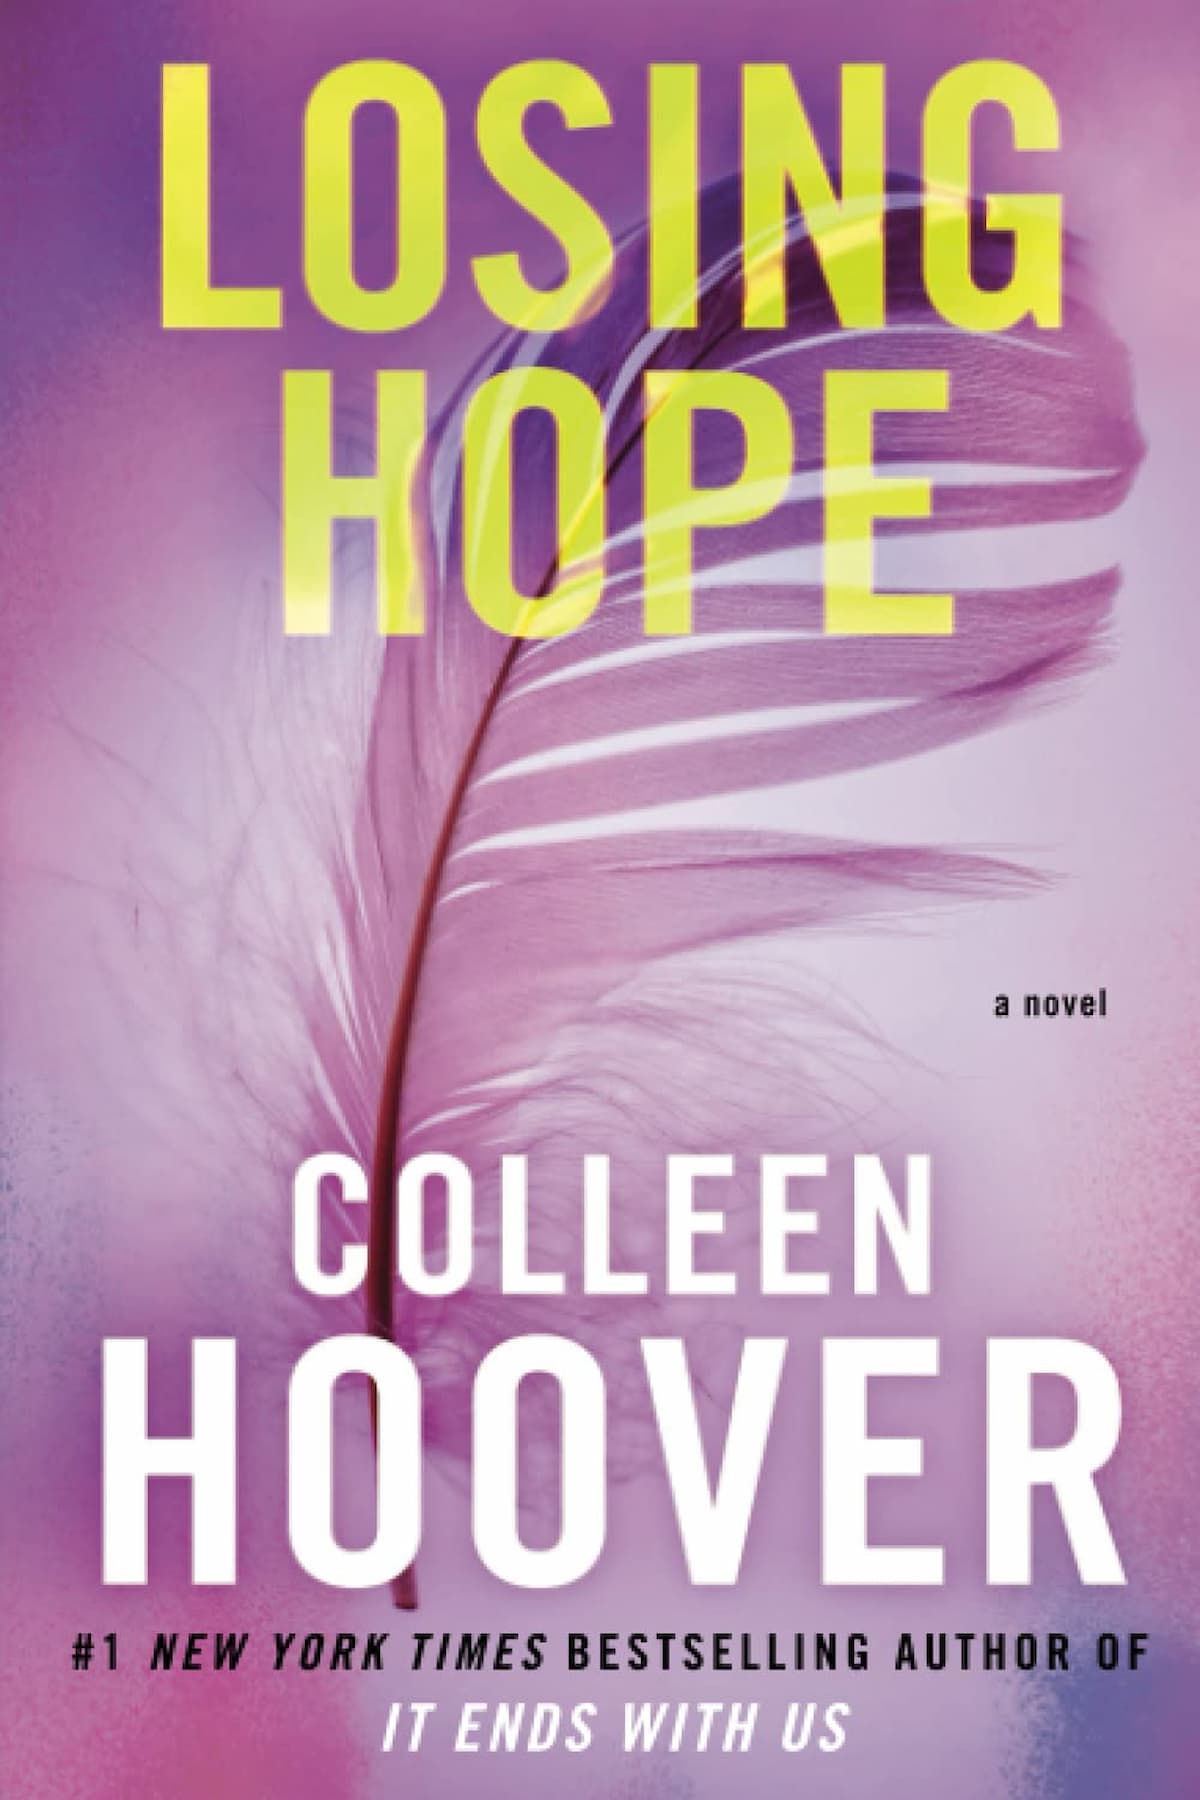 Colleen Hoover Books In Order, Coming of Age, Contemporary Romance, Fiction, Hopeless Books In Order, Hopeless series, New Adult Romance, Romance, Losing Hope By Colleen Hoover (Hopeless Series Book 2)